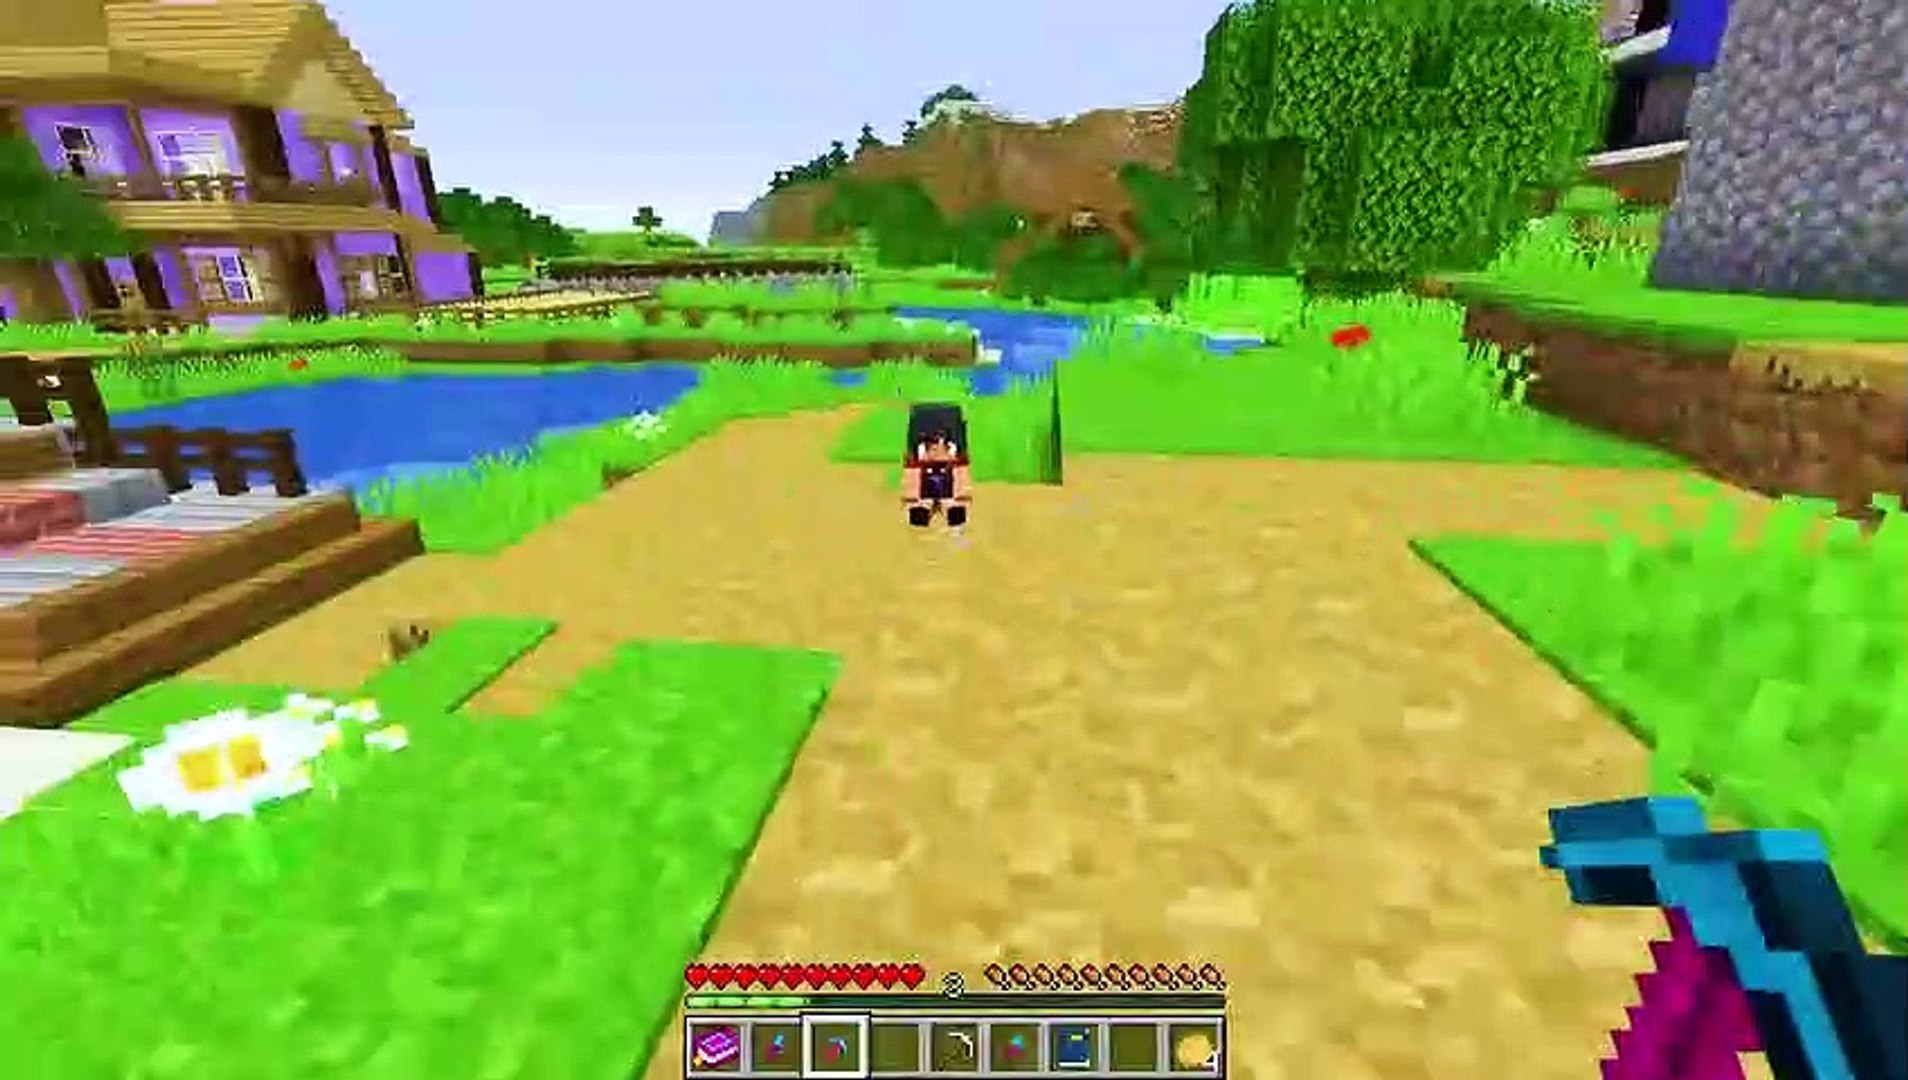 Aphmau and Aaron HAD A BABY in Minecraft!